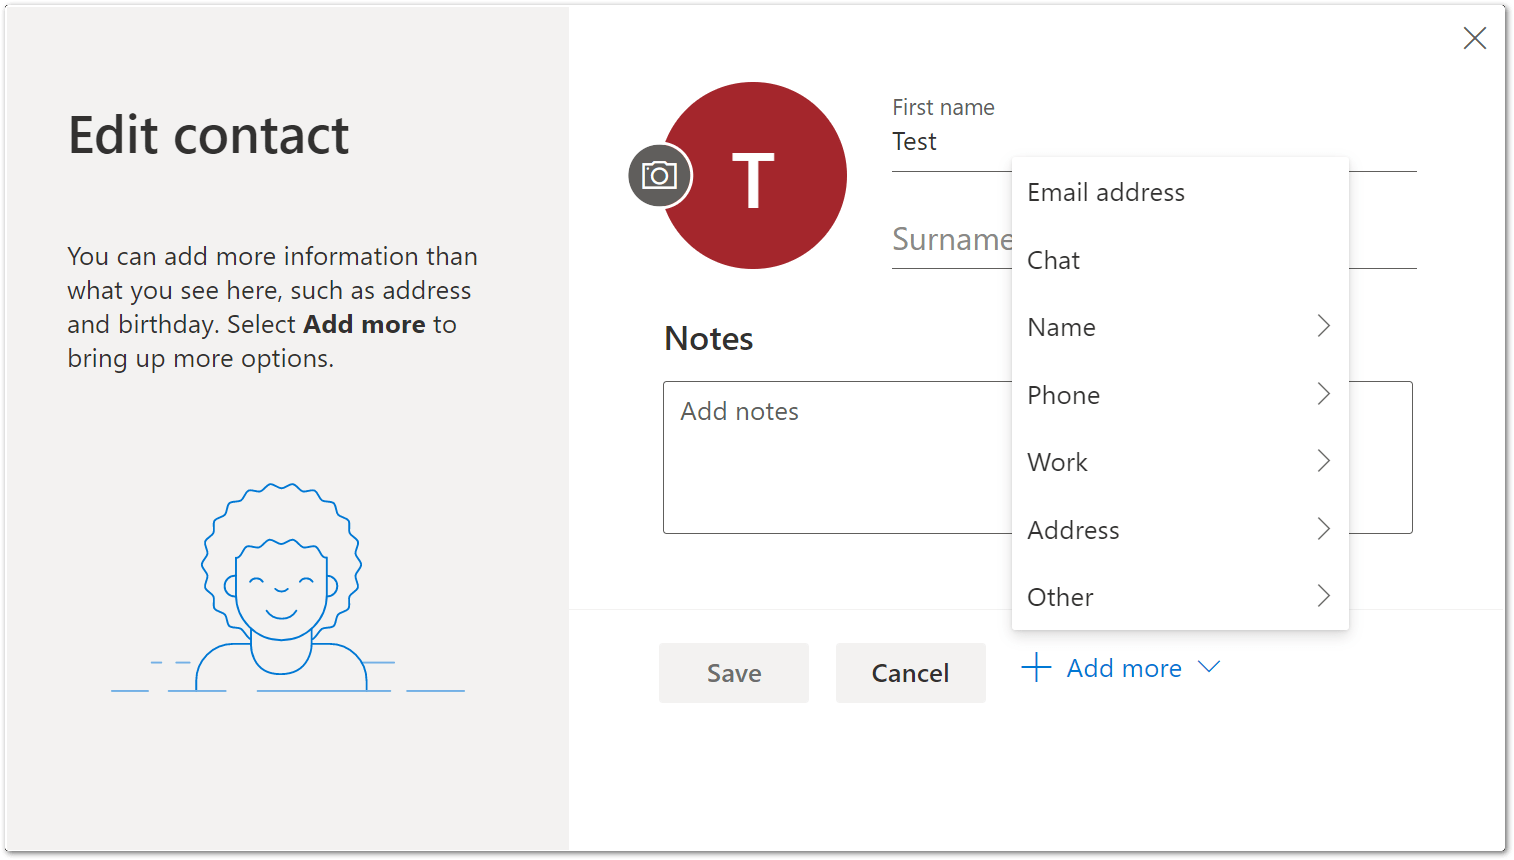 update contacts' information on Outlook to fix Microsoft Teams contacts and calendar not showing, updating, or syncing with Outlook